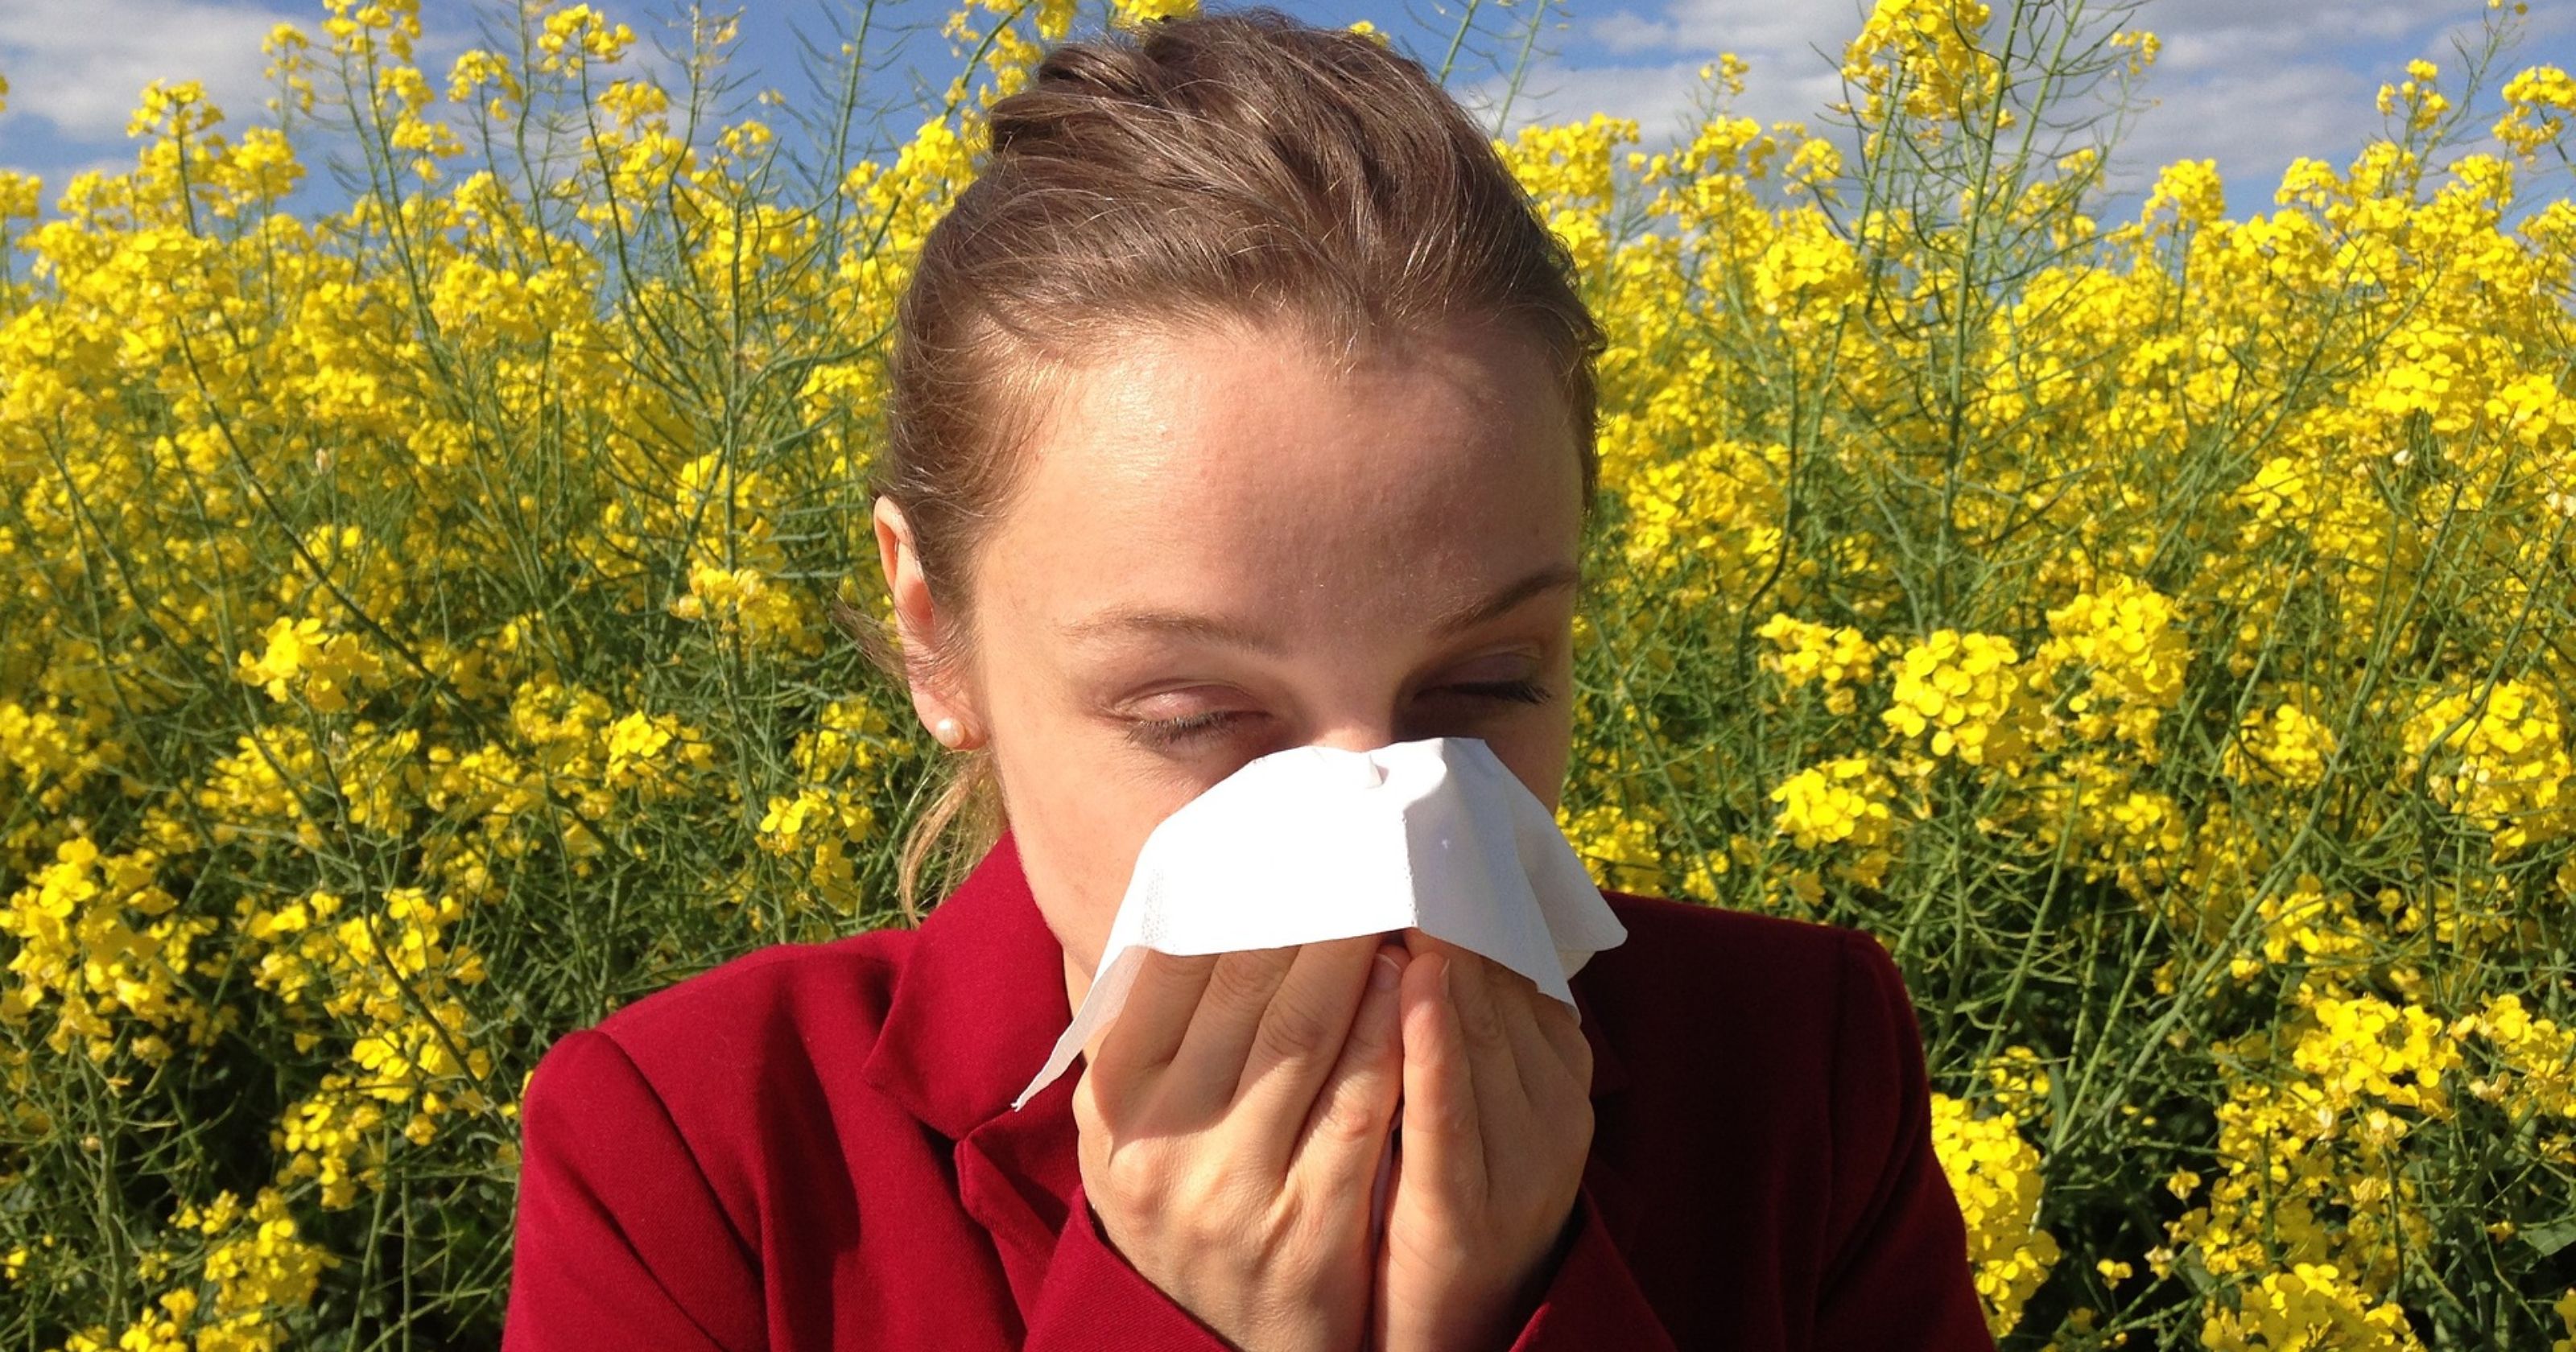 Nashville is an 'Allergy Capital.' Here's how to survive